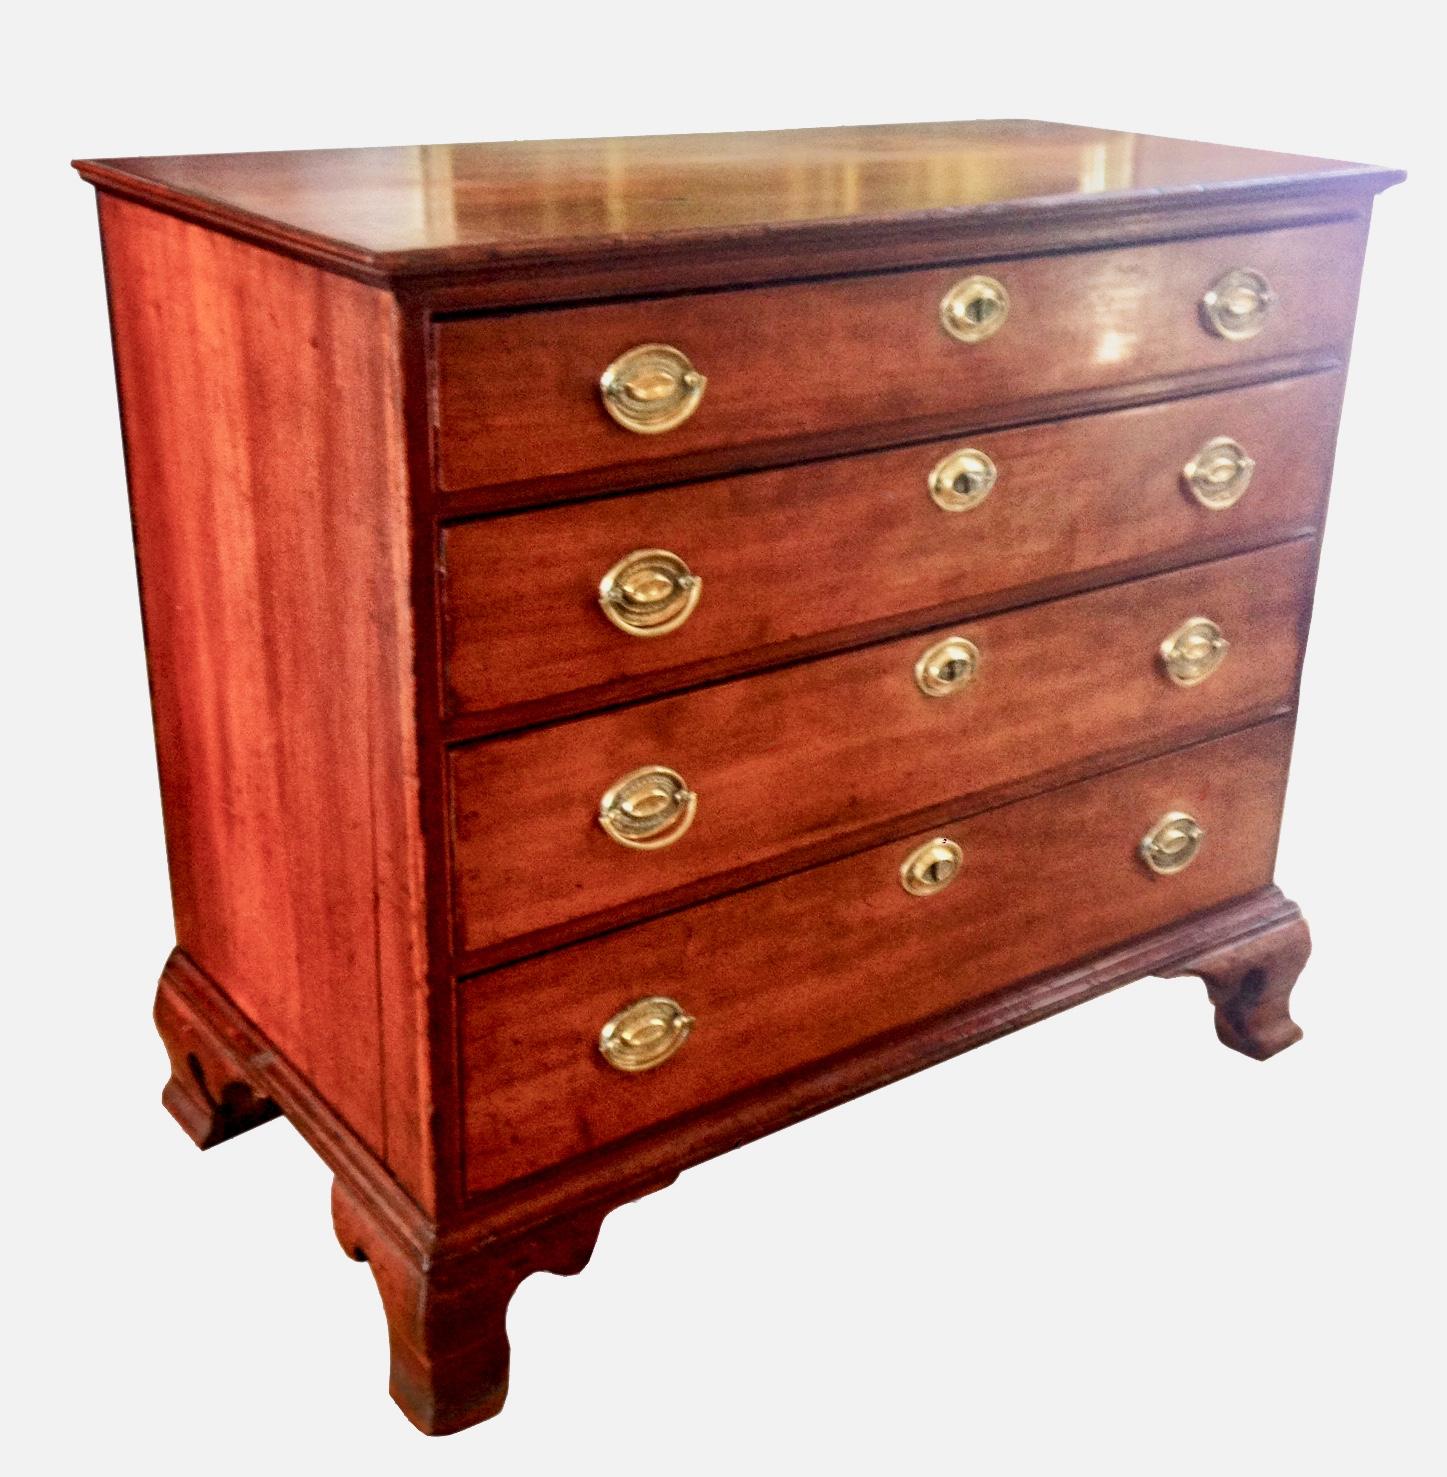 Rare Chippendale period cherrywood commode with four graduated drawers and exquisite original ogee bracket feet, original brass pulls, Circa 1780.
